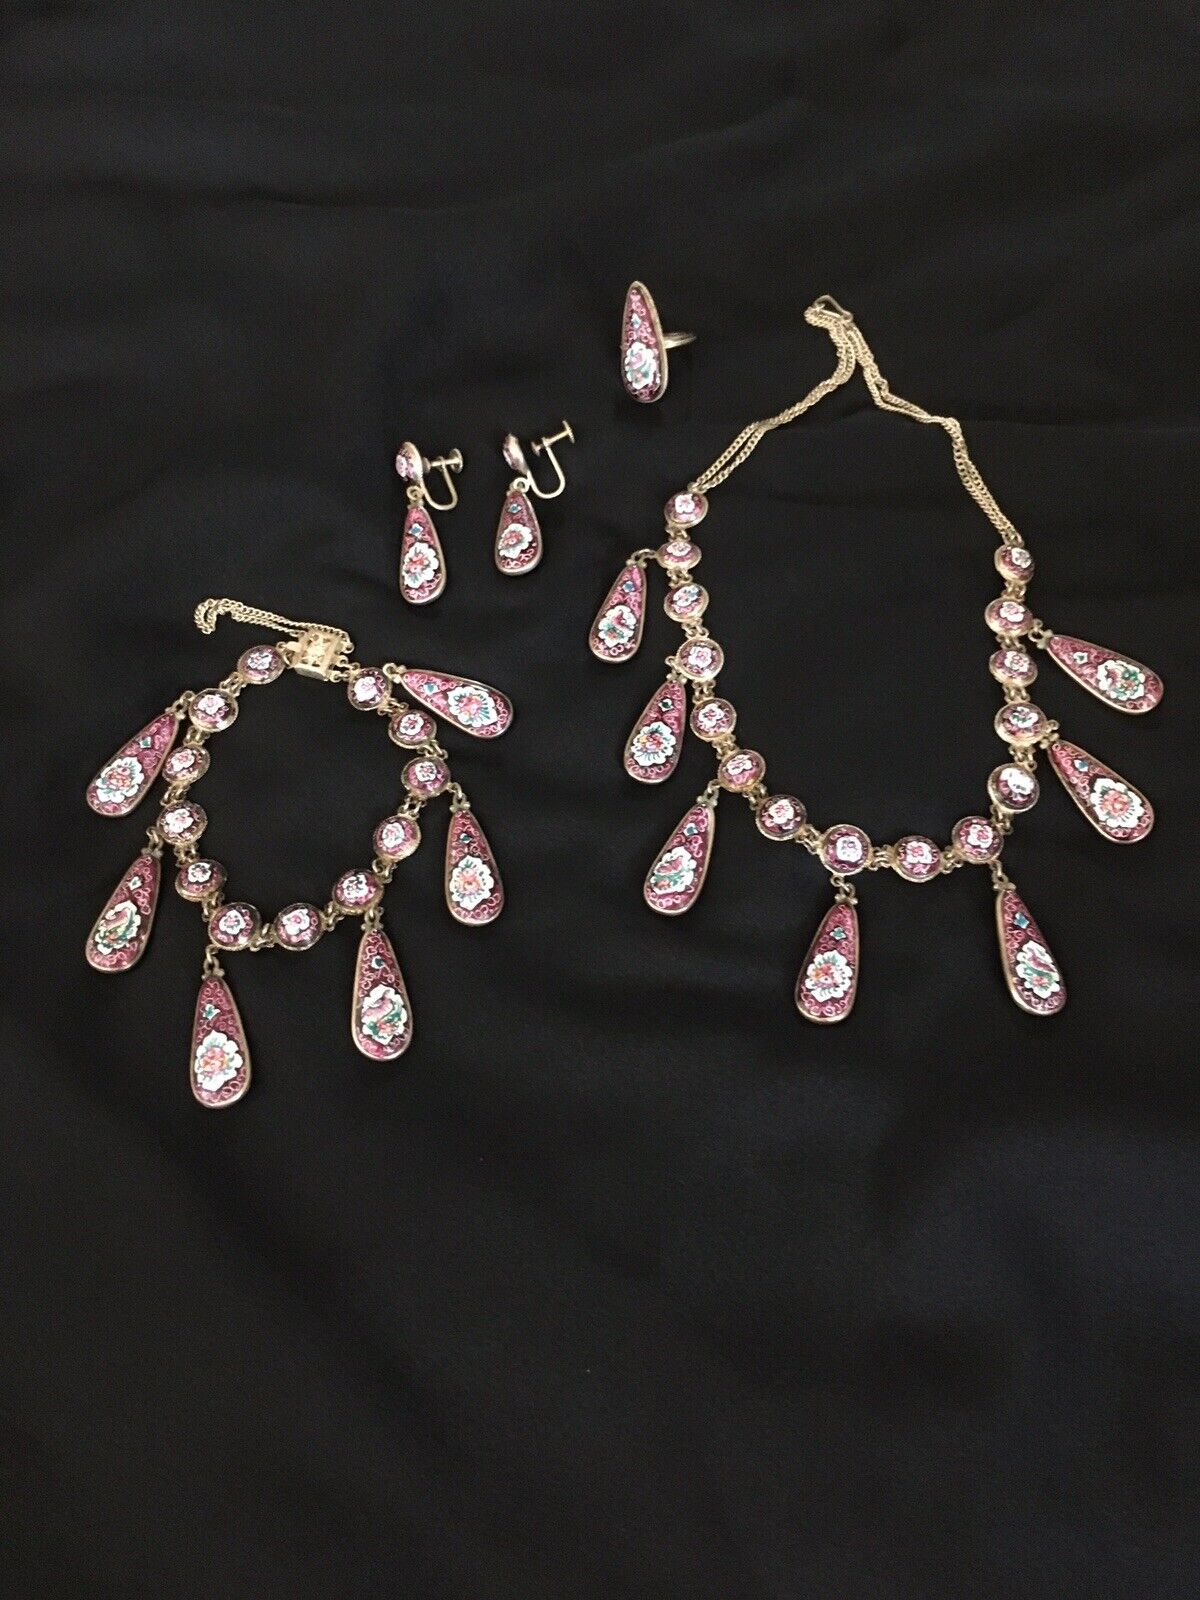 Antique 1930's silver quality 875 Persian Hand-painted Jewelry Set